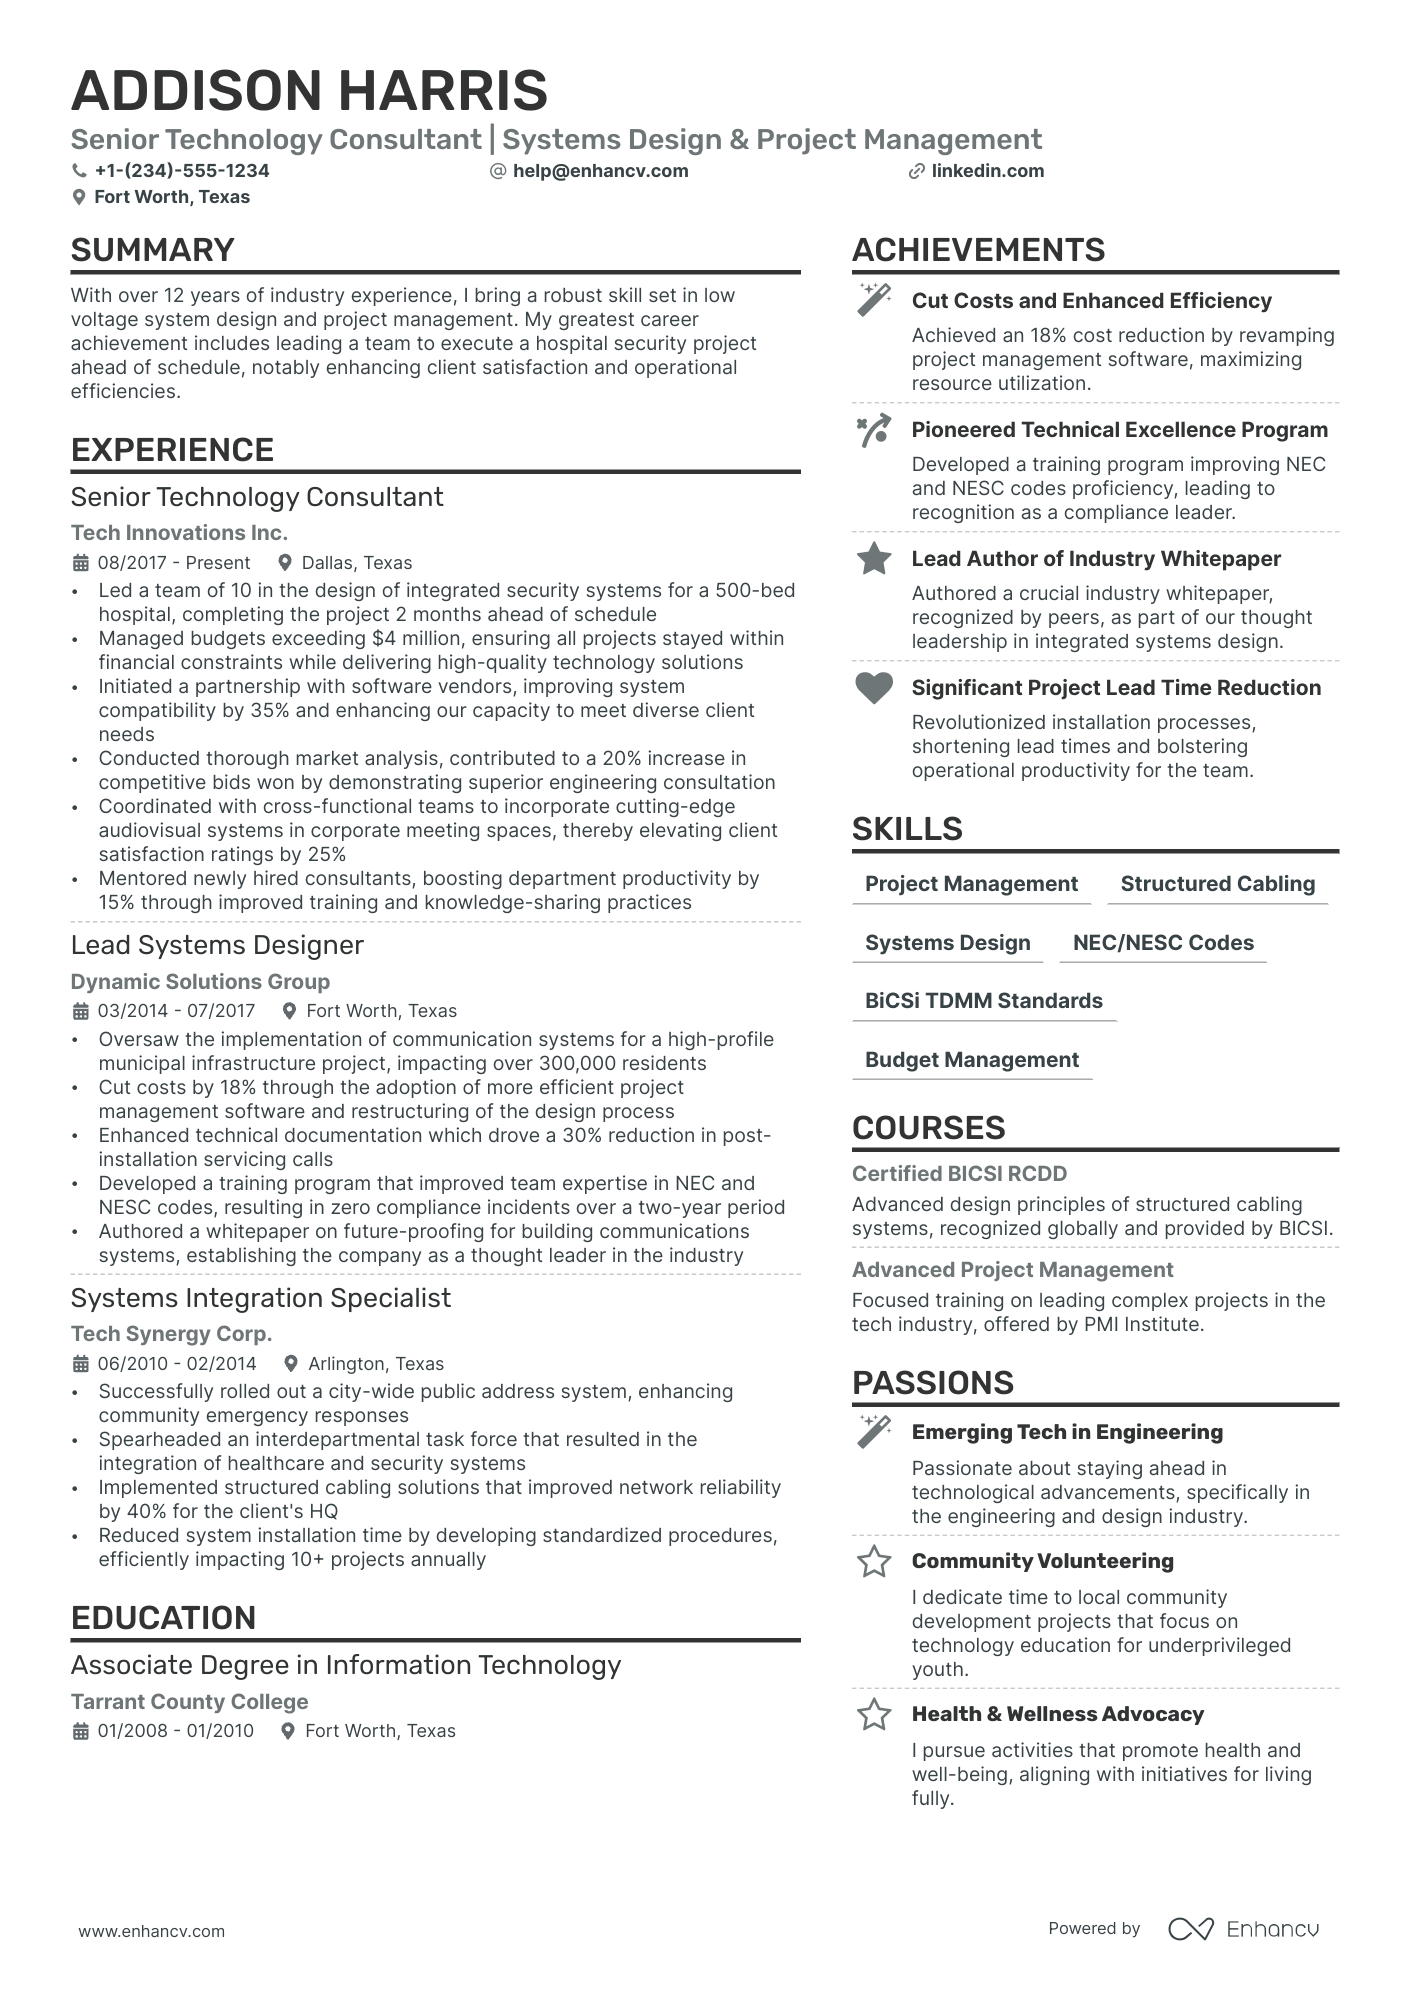 Technology Consultant resume example